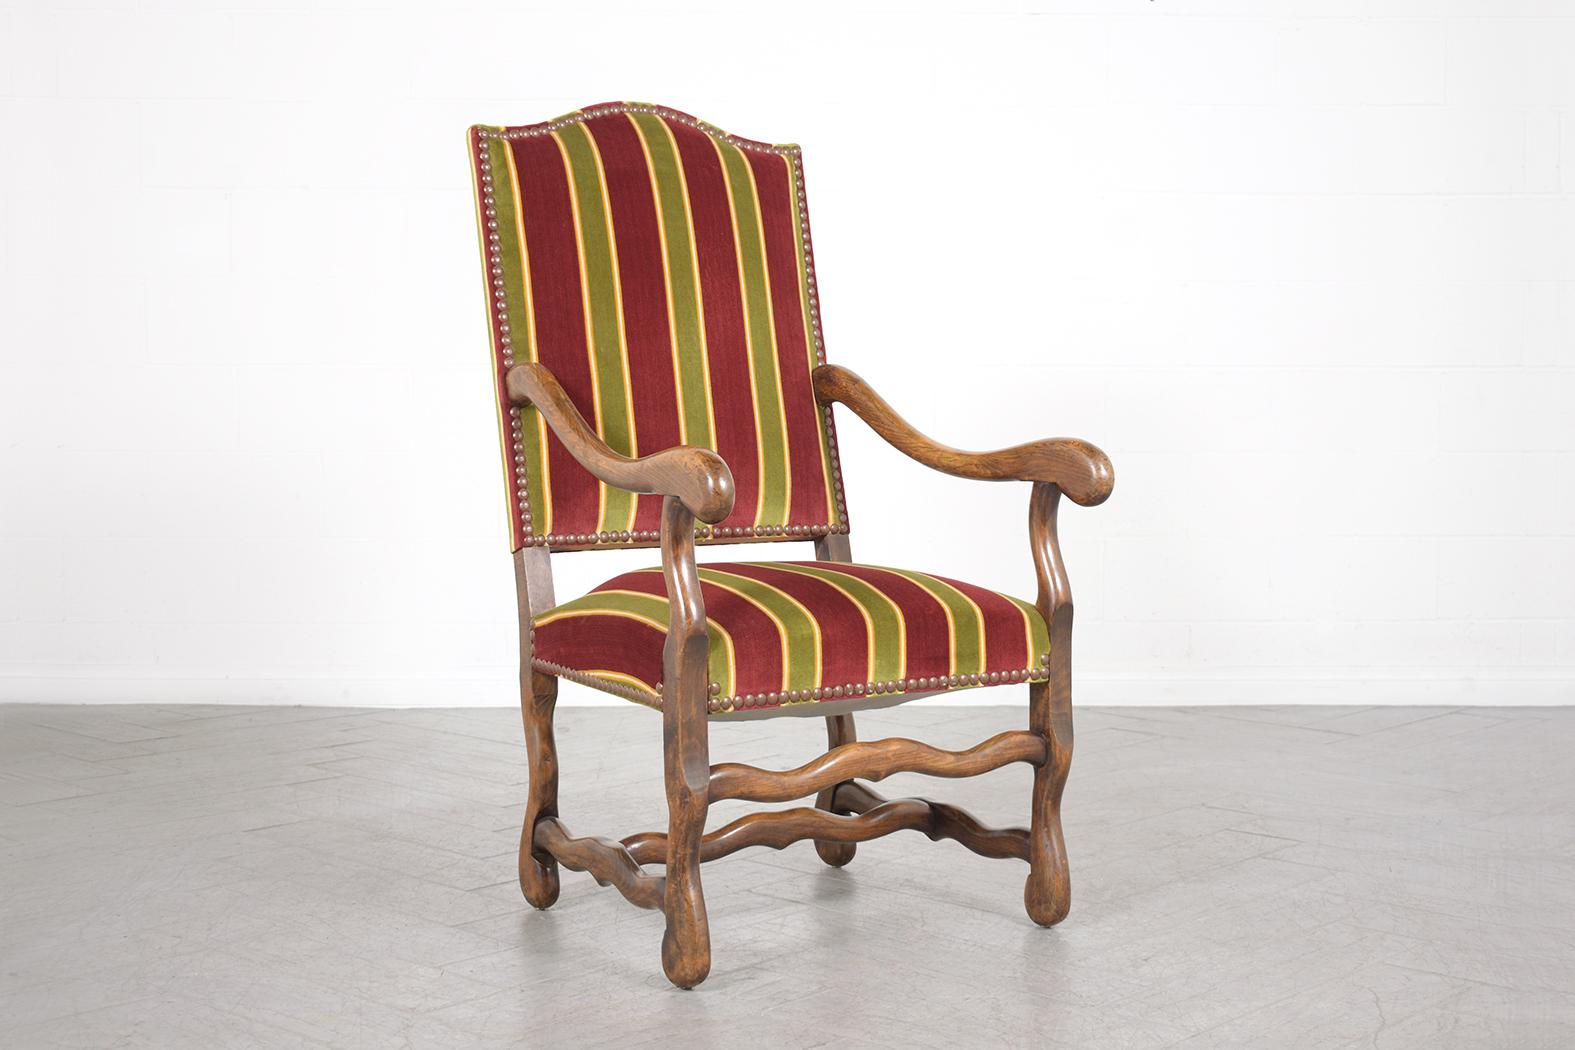 19th Century French Armchairs: Dark Walnut Finish with Striped Velvet Upholstery For Sale 2